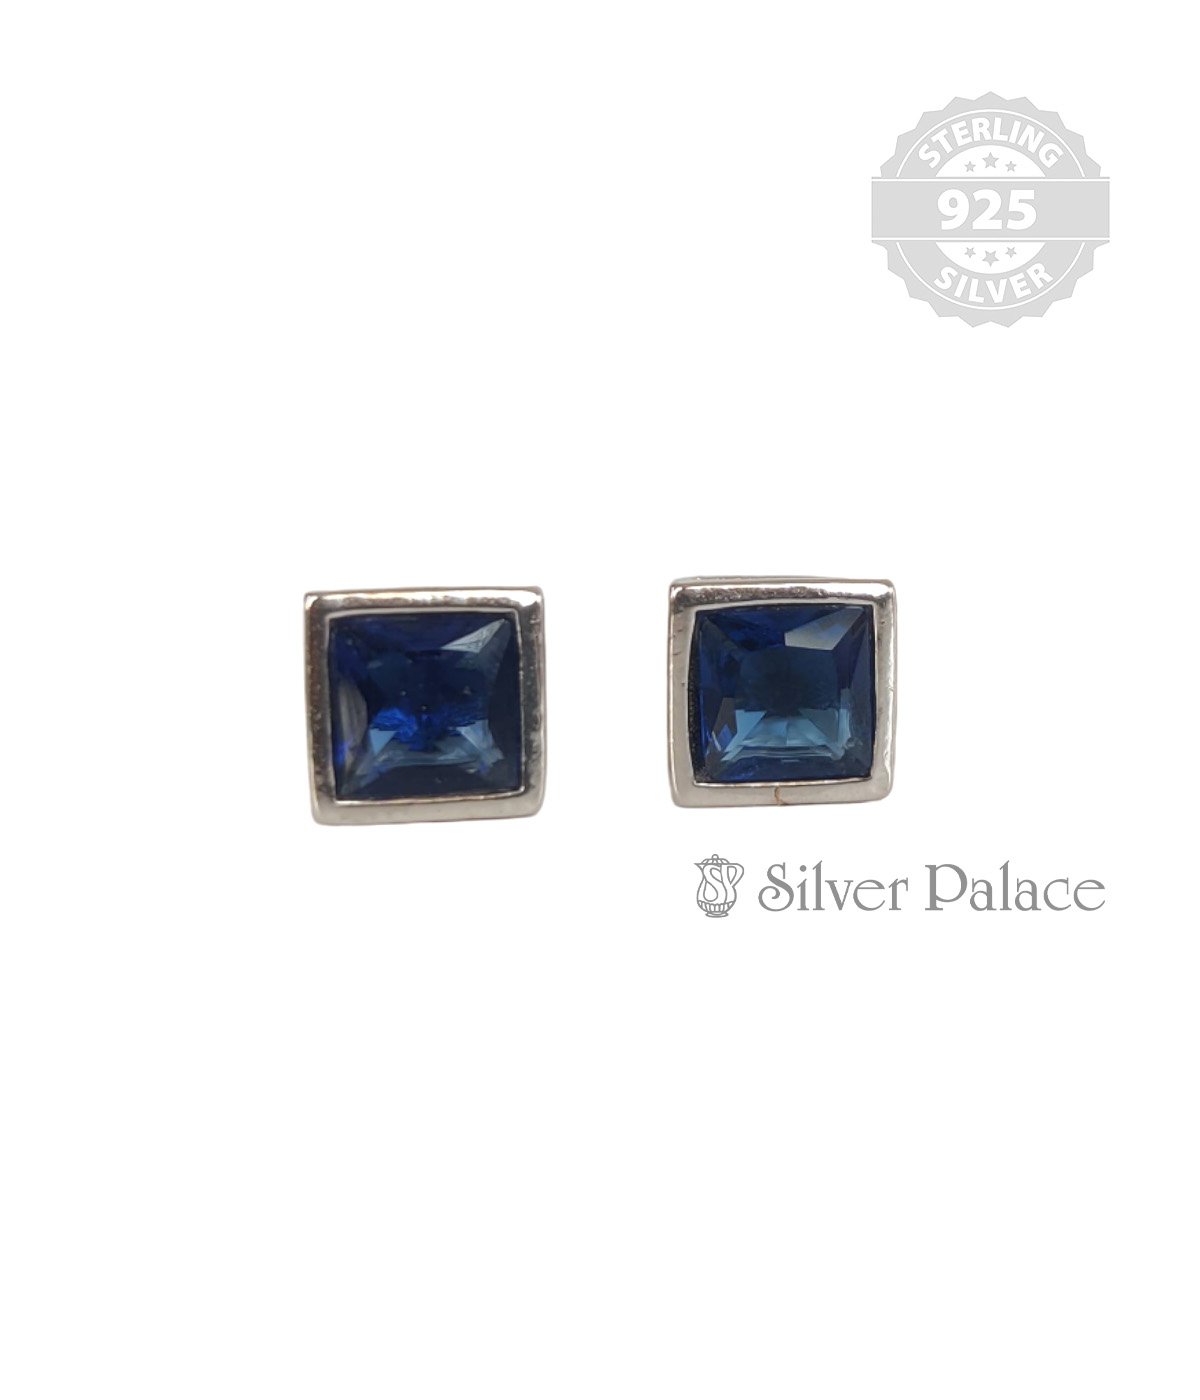 92.5 STERLING SILVER SQUARE SHAPE BLUE STONE STUD